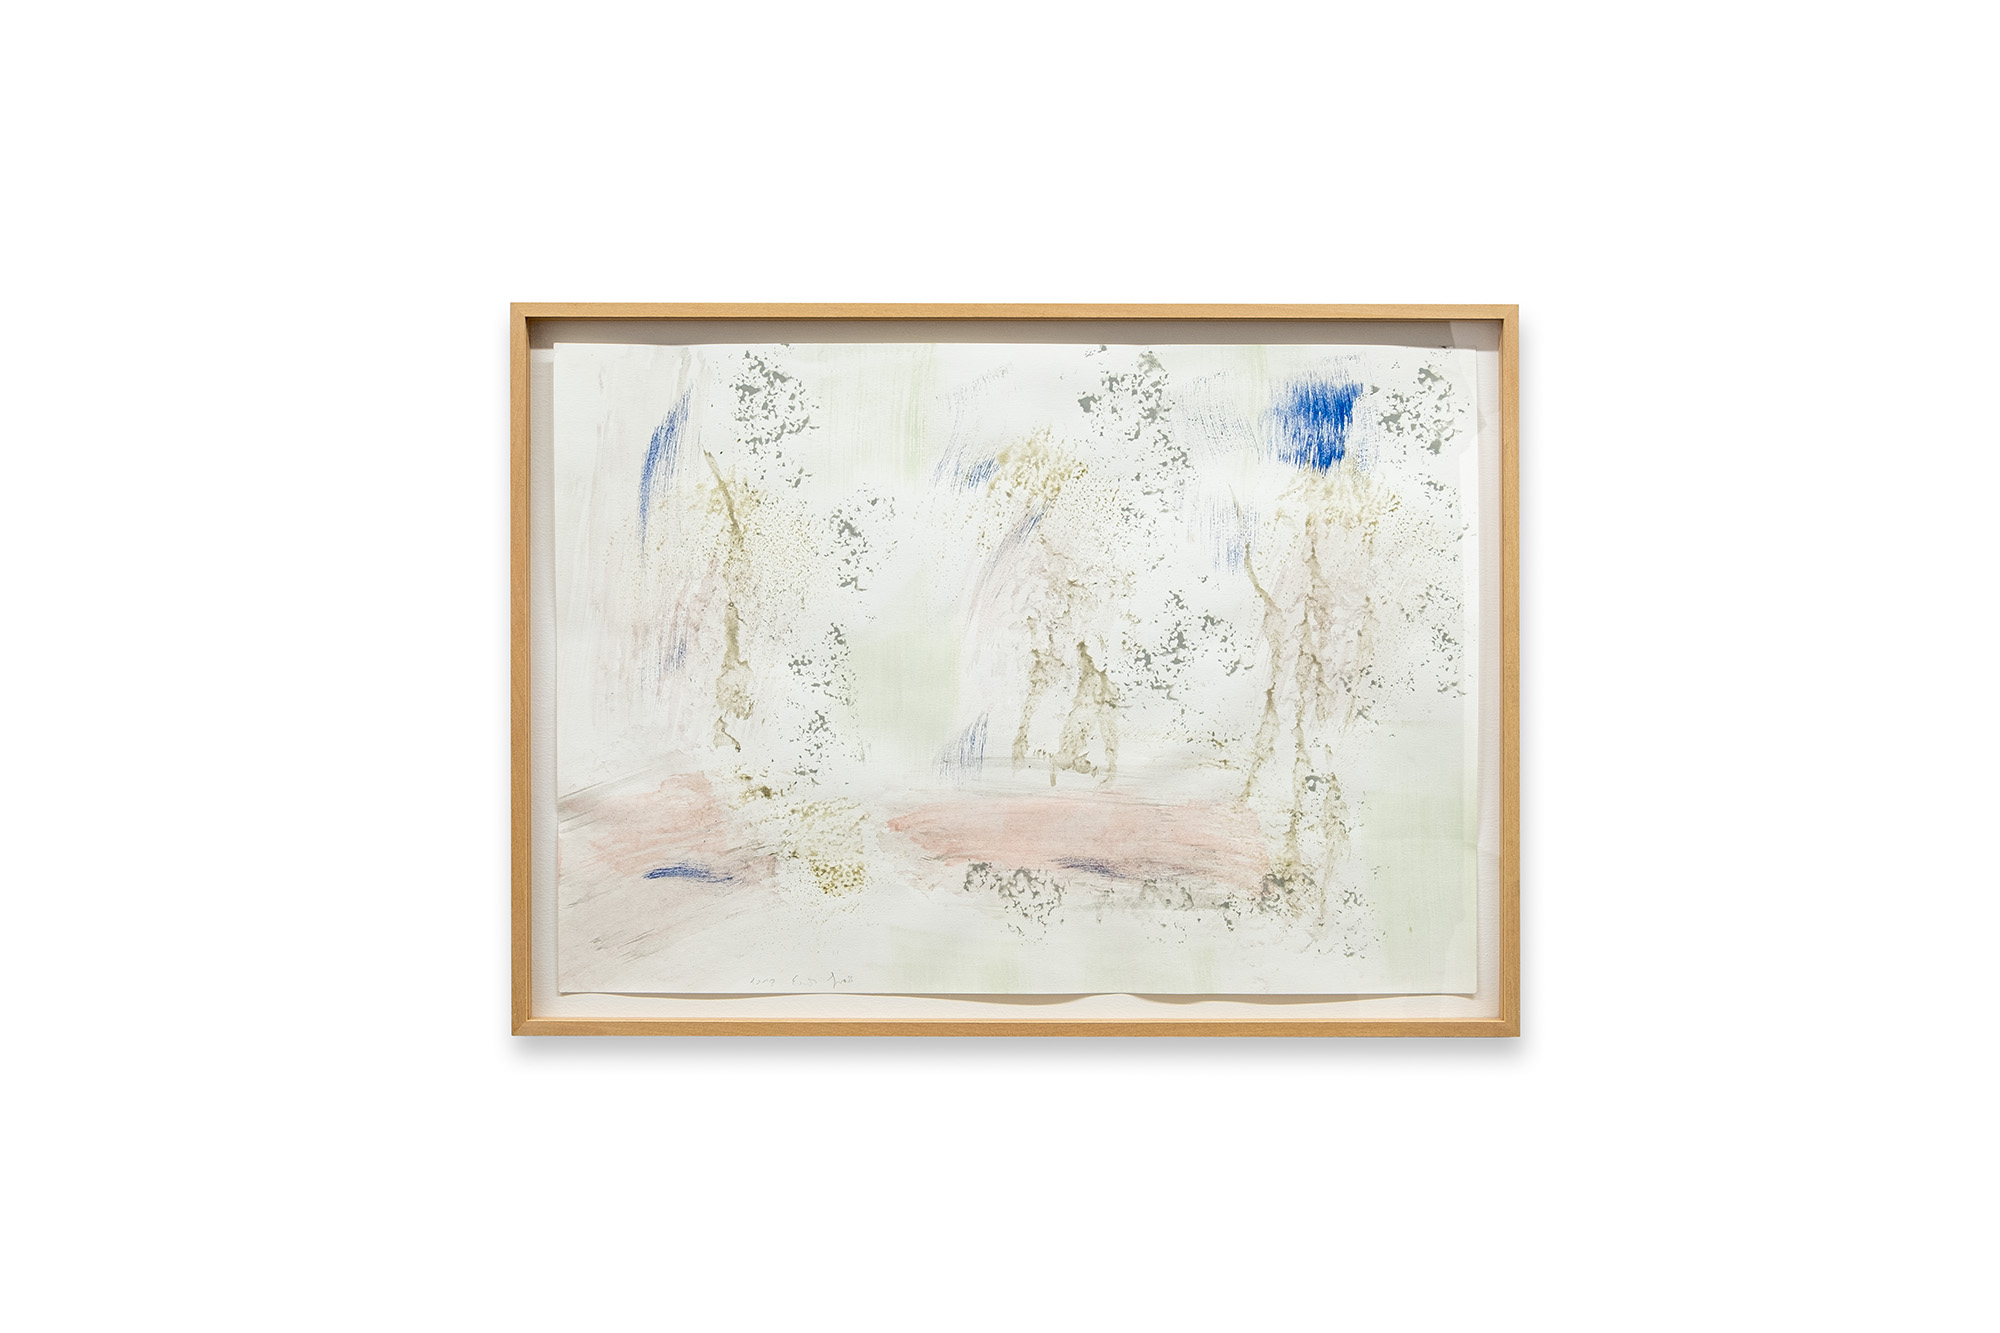 Erwin Gross, untitled, 2013, watercolor on paper, 42 x 60 cm